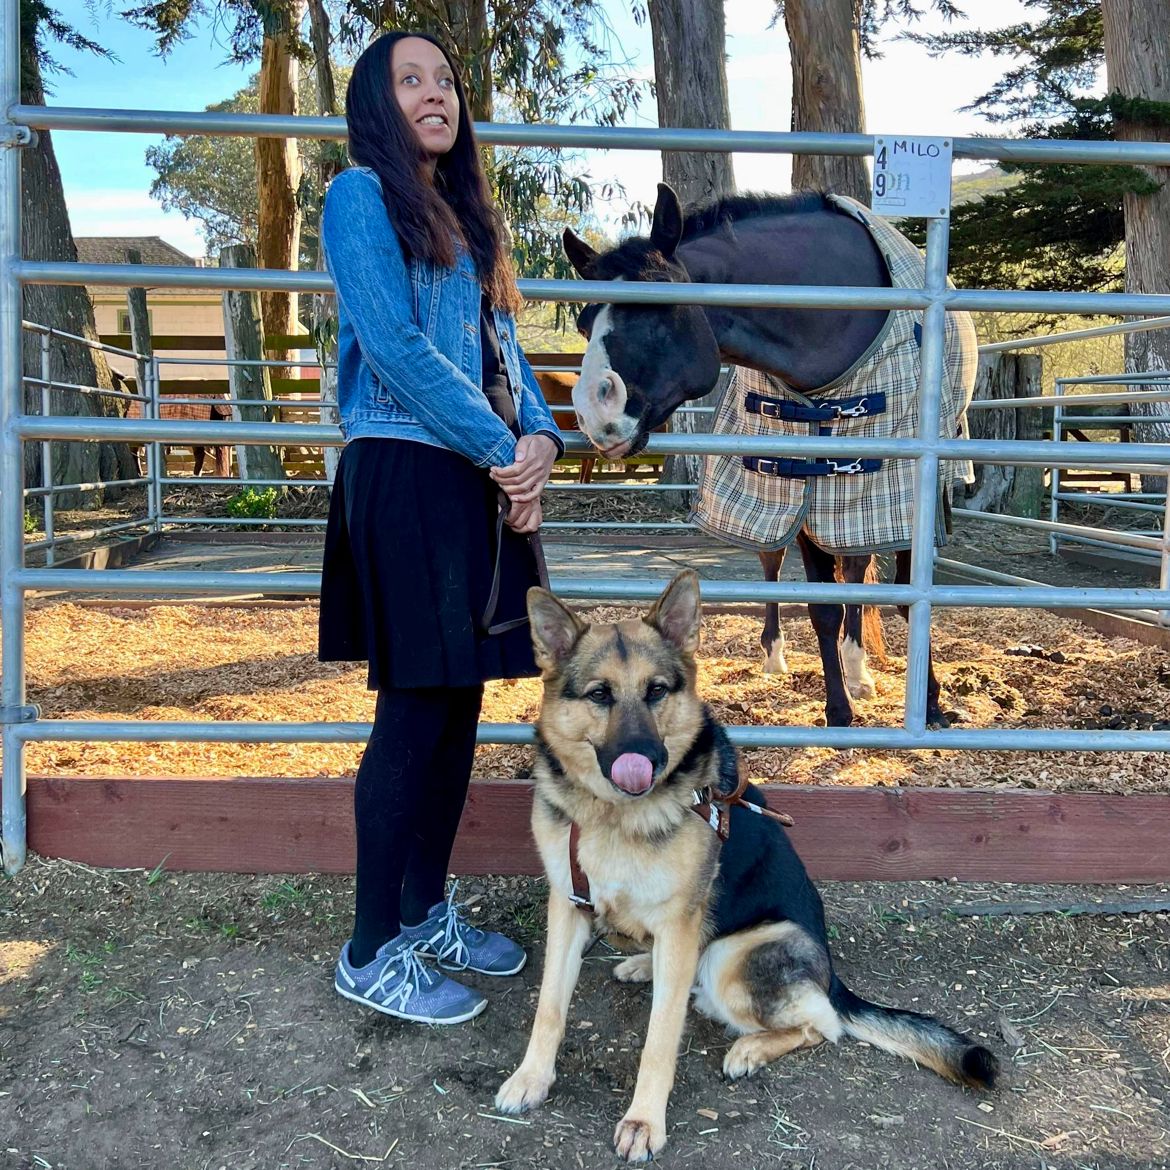 Milo, a black horse with a white blaze, pokes his head through the fence of his paddock to sniff my hands. Beside me, Mylo, my German Shepherd dog, wears a goofy smile with his tongue licking his nose. Photo by our friend & equestrian guide Lauren Janicki.